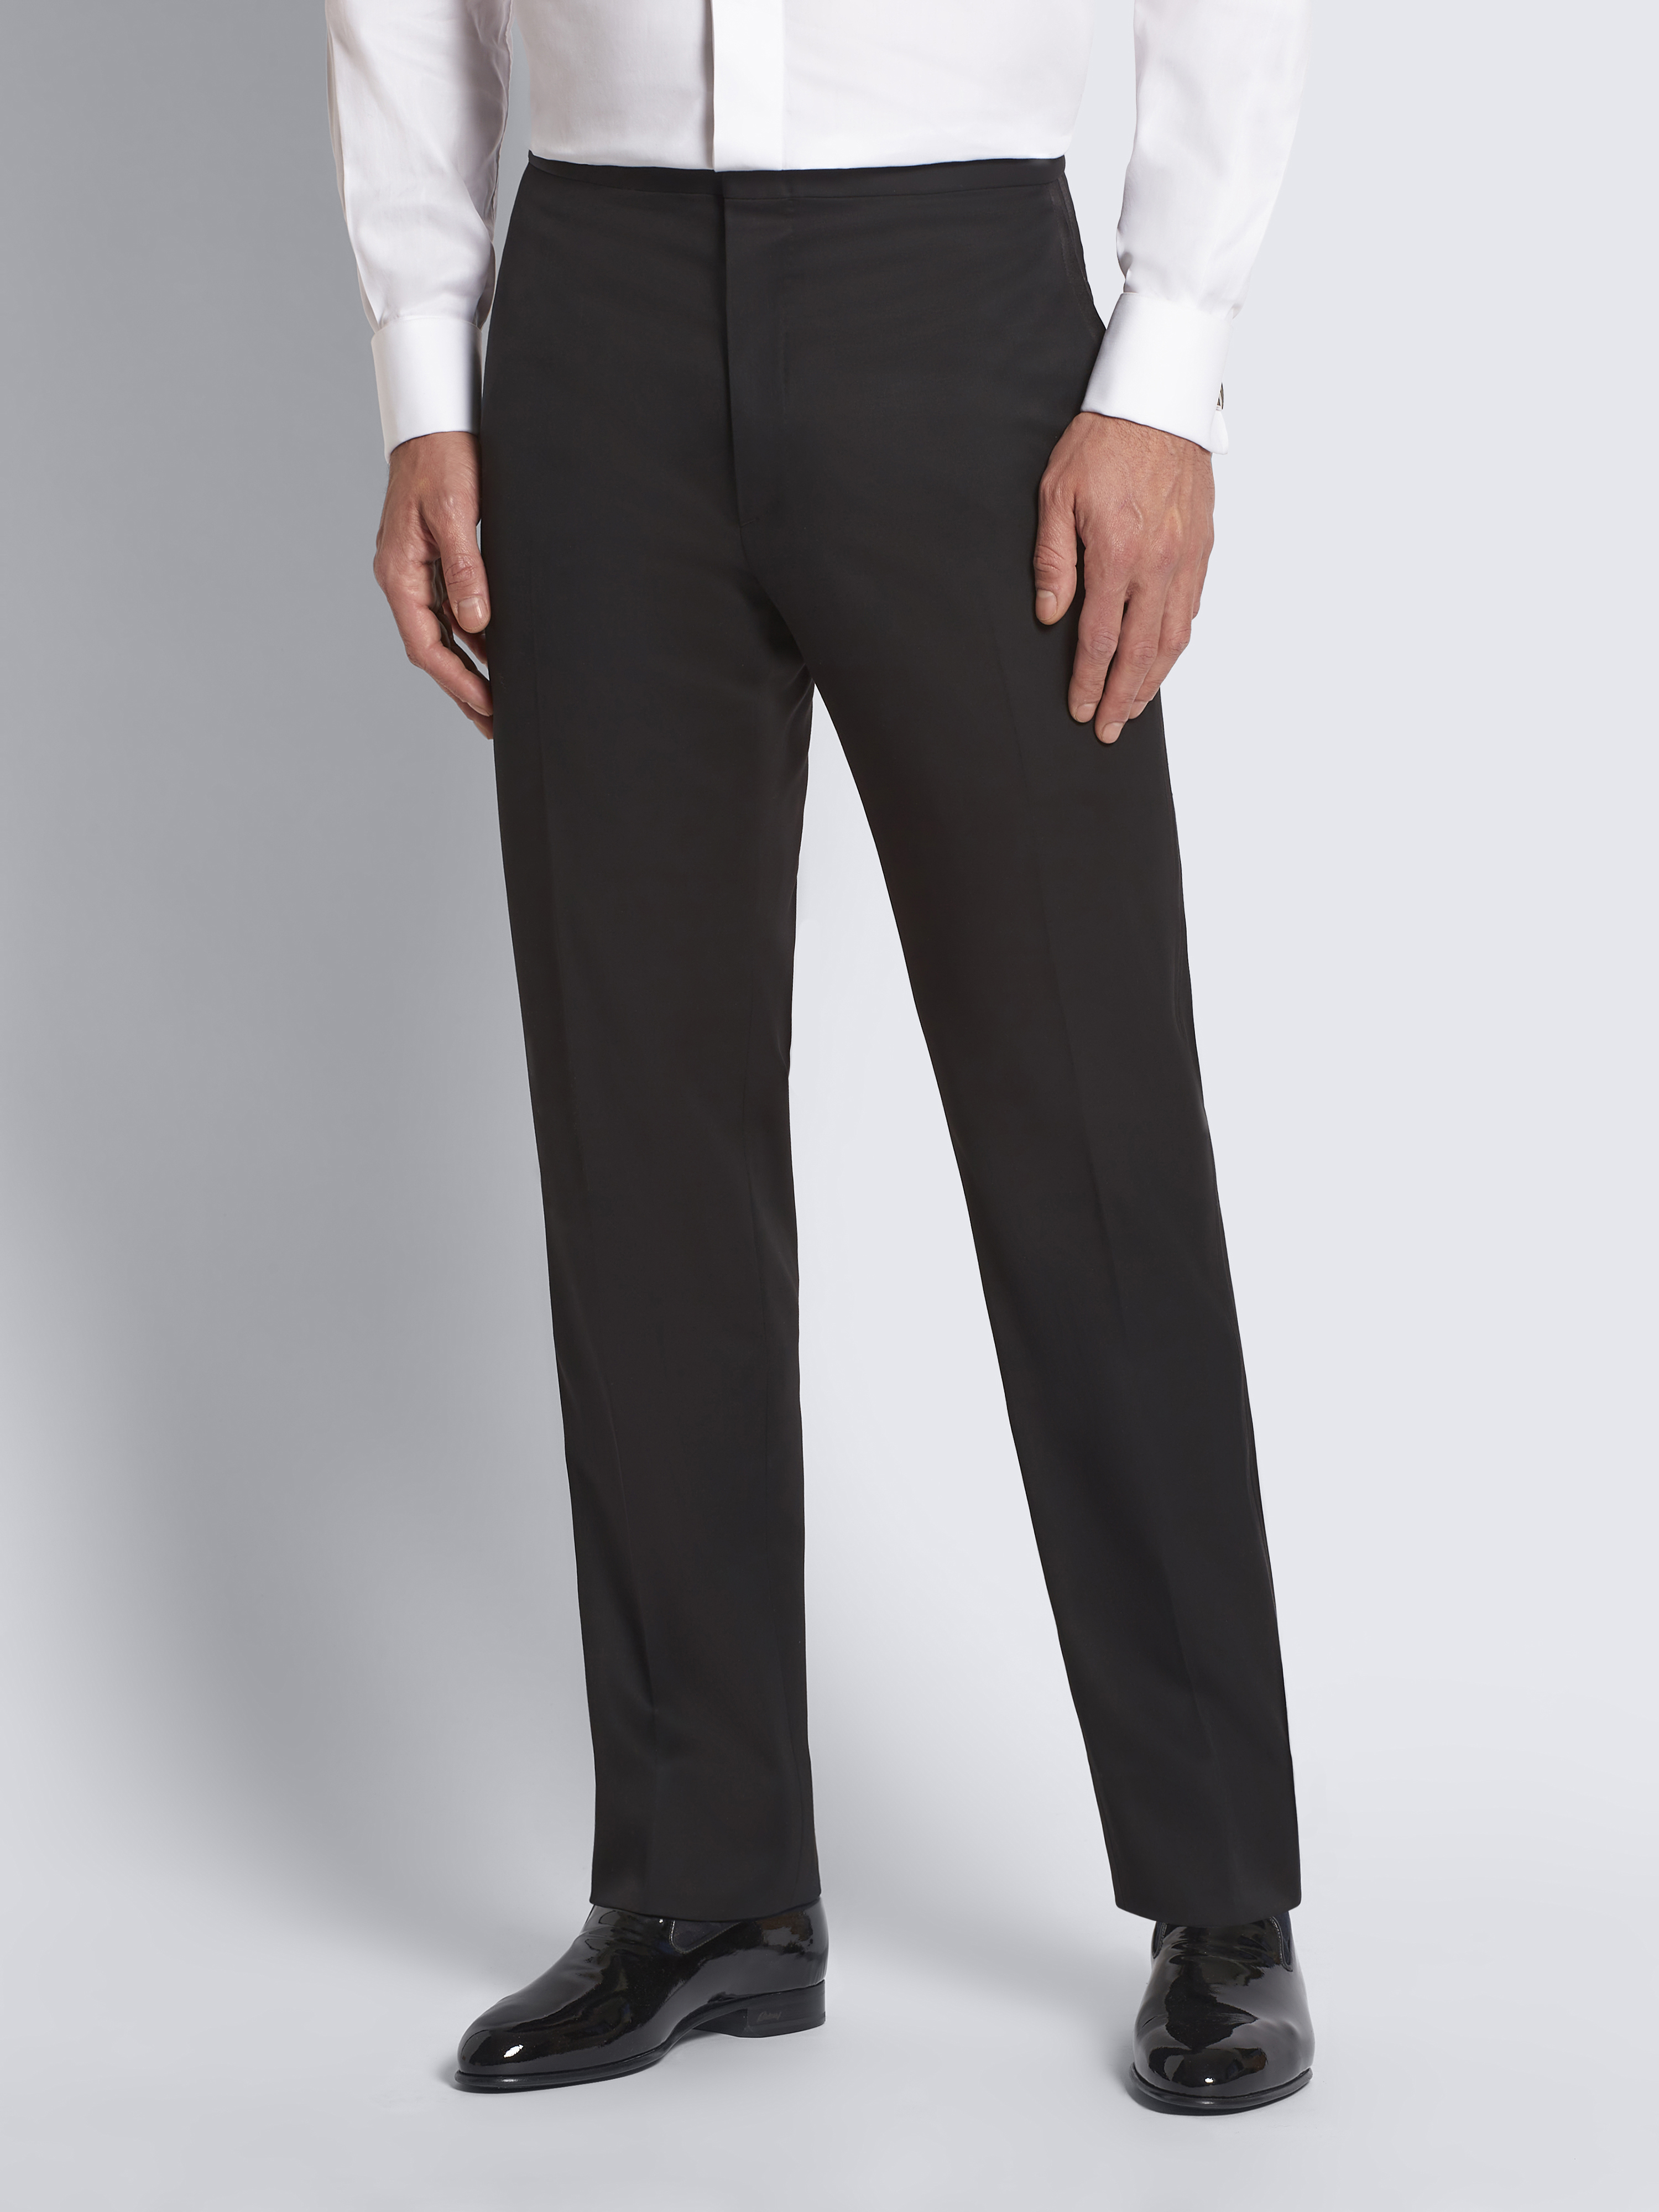 Buy Black Formal Trousers For Female Online  Best Prices in India   UNIFORM BUCKET